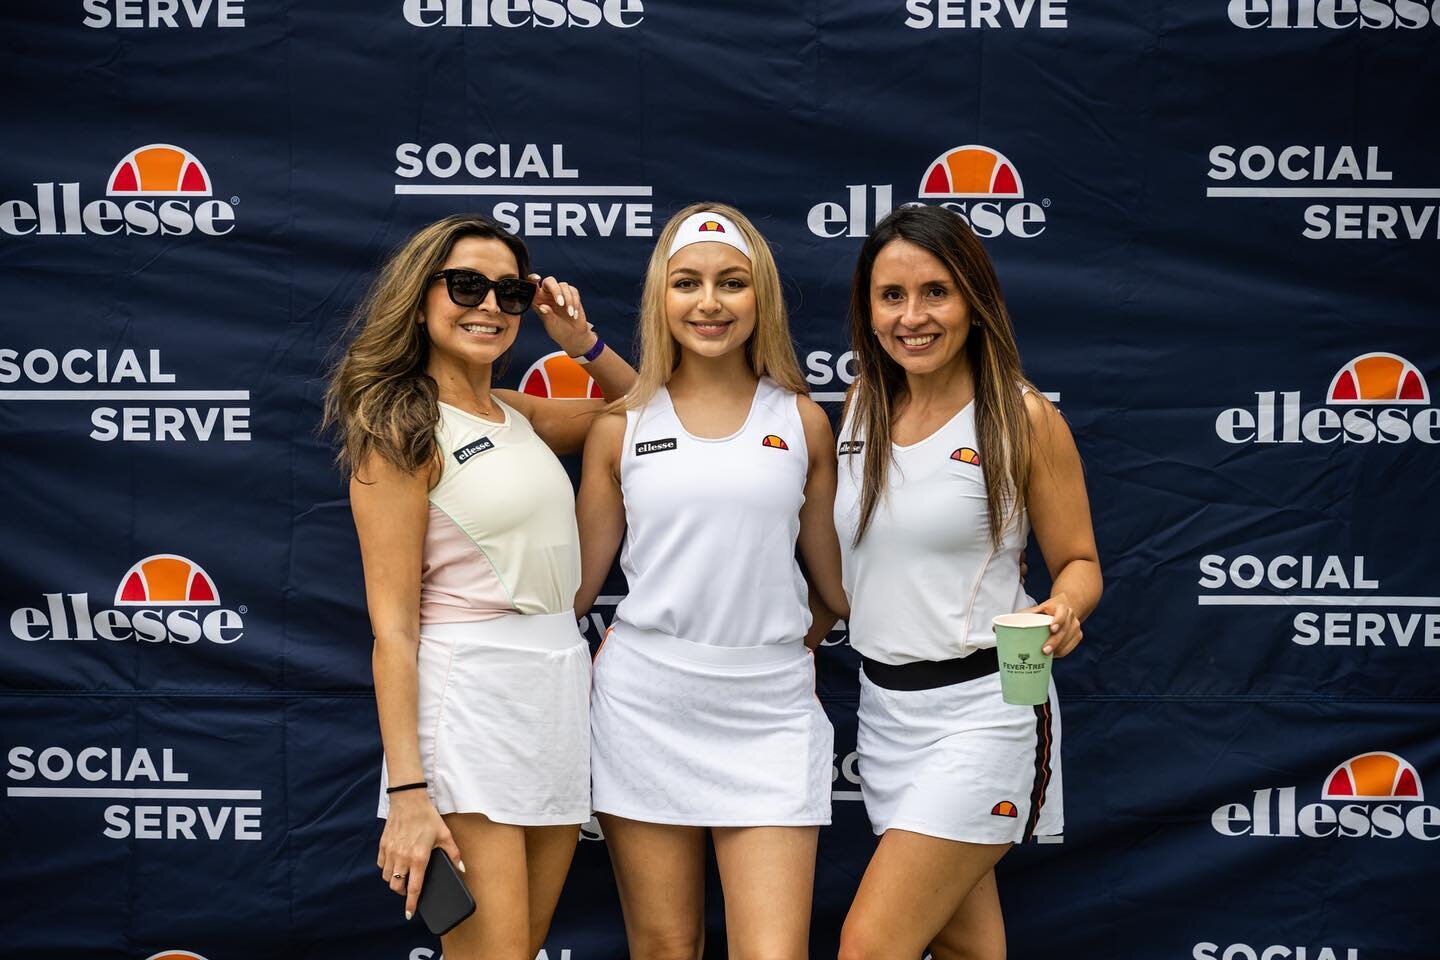 **Win A $500 Ellesse Gift Pack**

Thanks to @ellesse_au we have best dressed packs to win at our End of Summer Party. 

To celebrate Mardi Gras month the theme is &lsquo;Colours of the Rainbow &amp; Glitter&rsquo;. Tag a friend who would nail this! 
